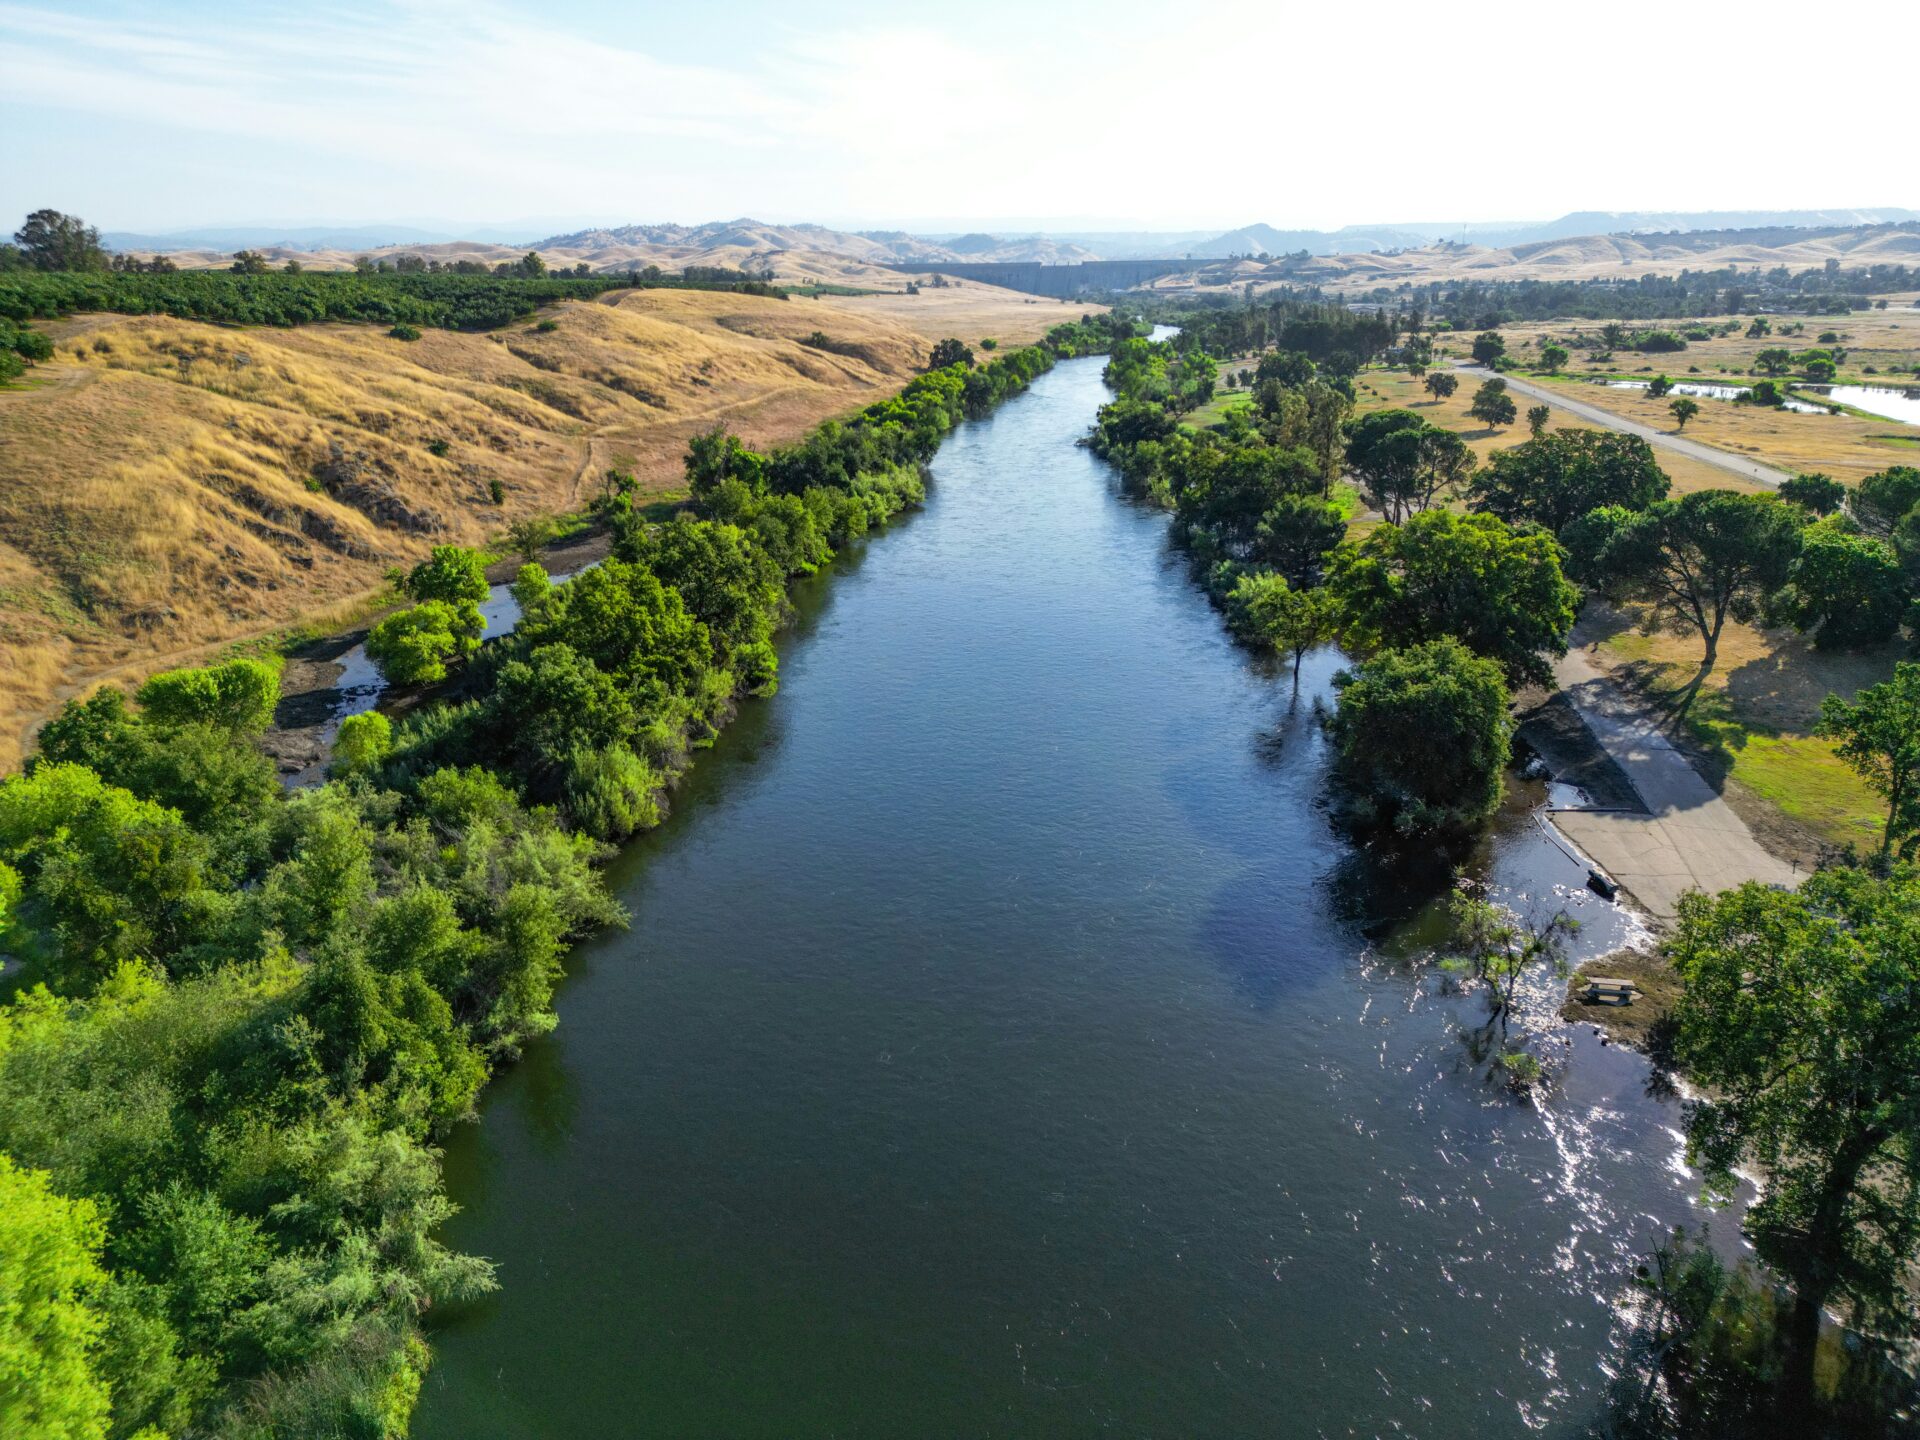 San Joaquin river with green and gold trees lining it.